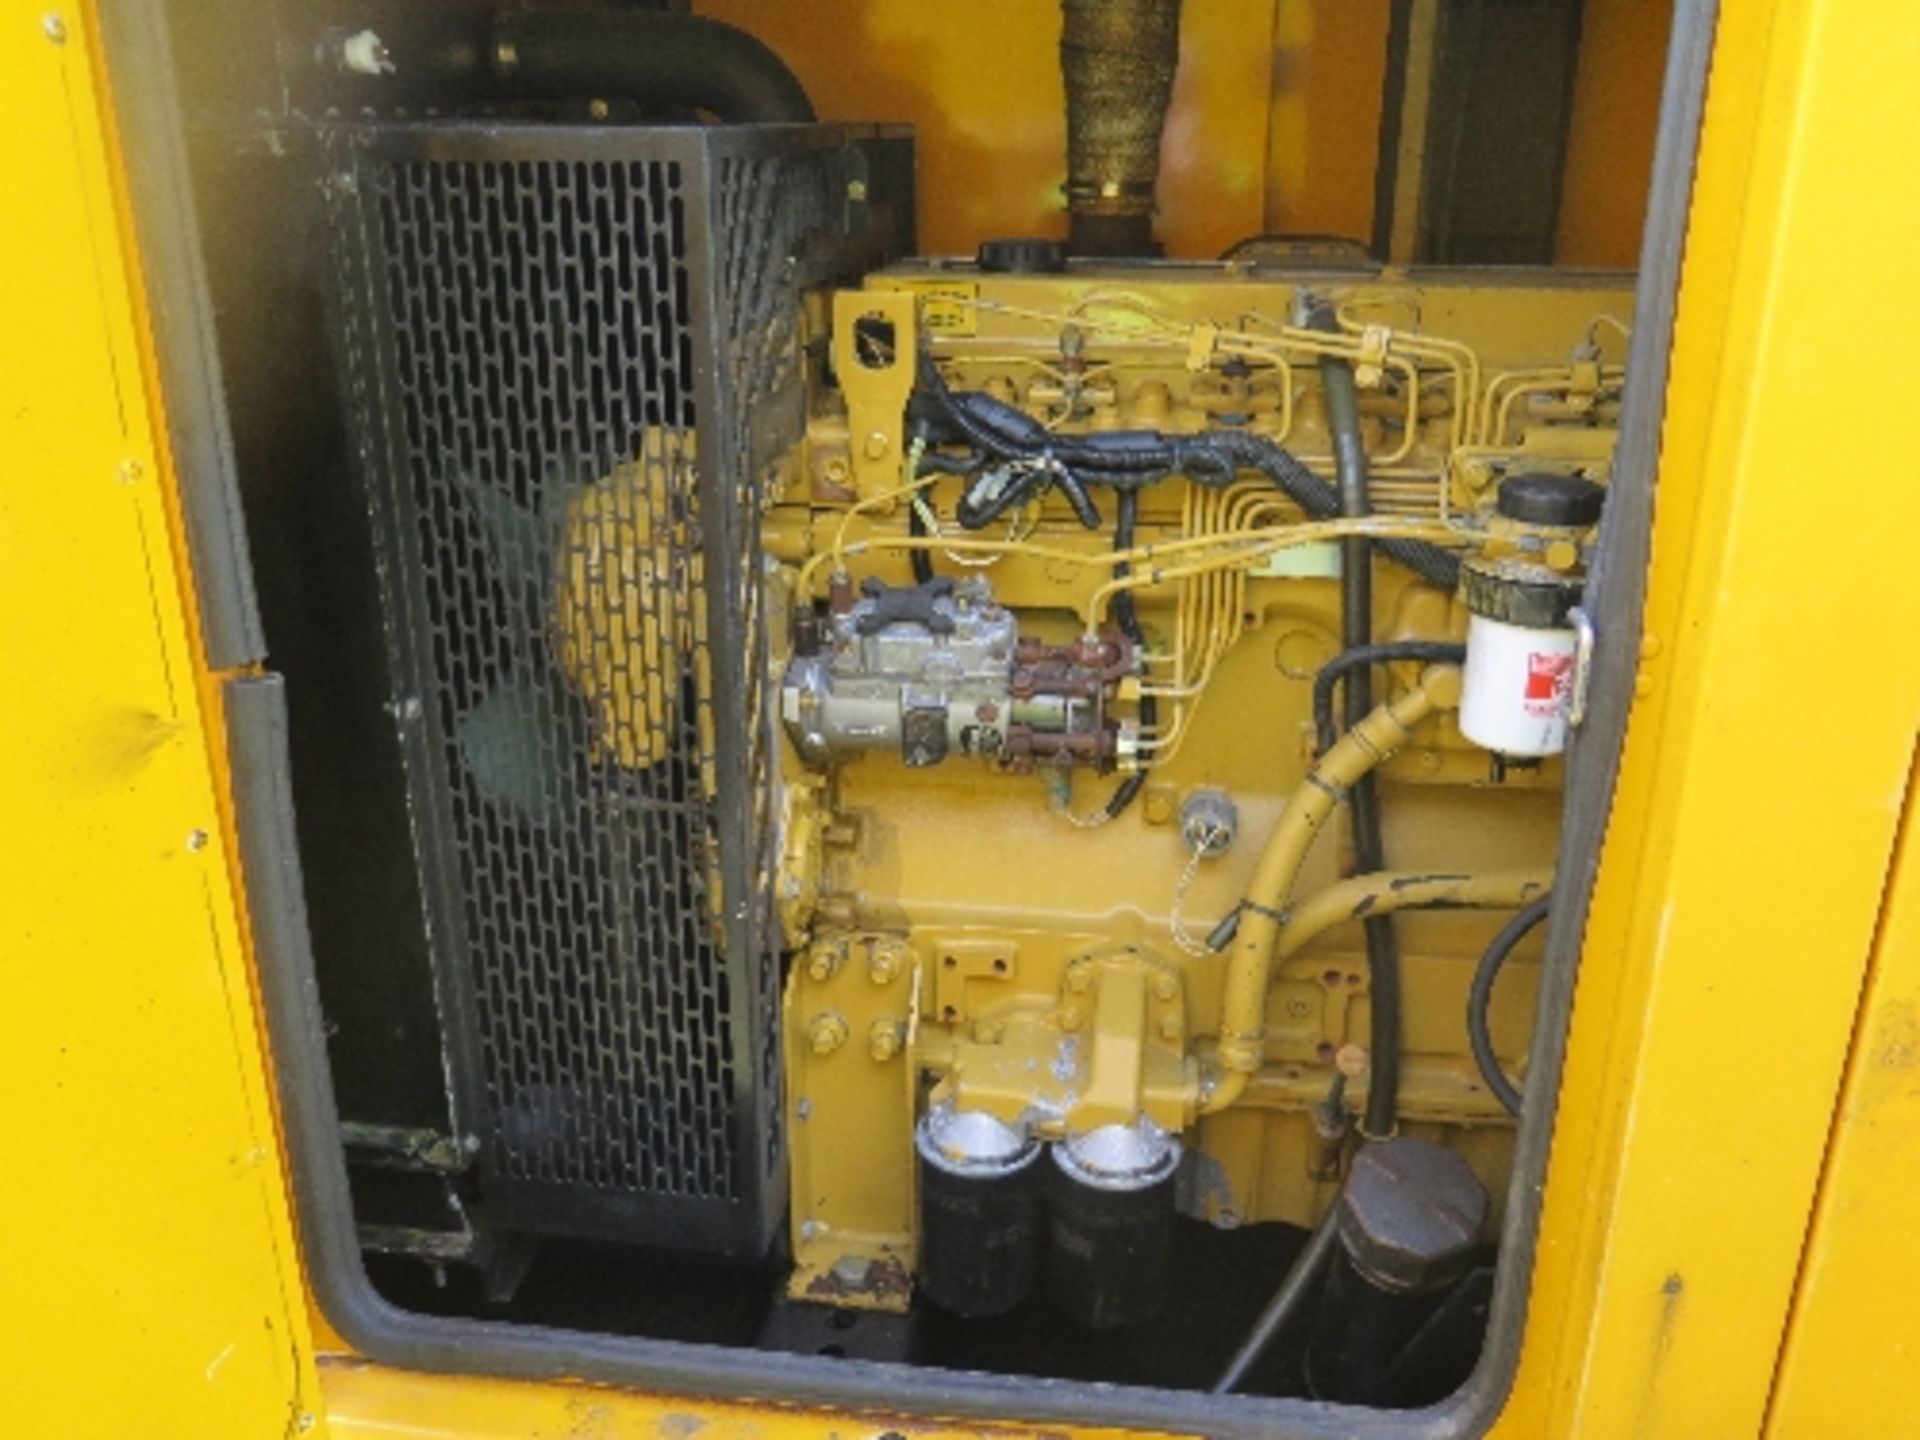 Caterpillar XQE100 generator 16850 hrs 138842
PERKINS POWER - RUNS AND MAKES POWER
ALL LOTS are - Image 3 of 6